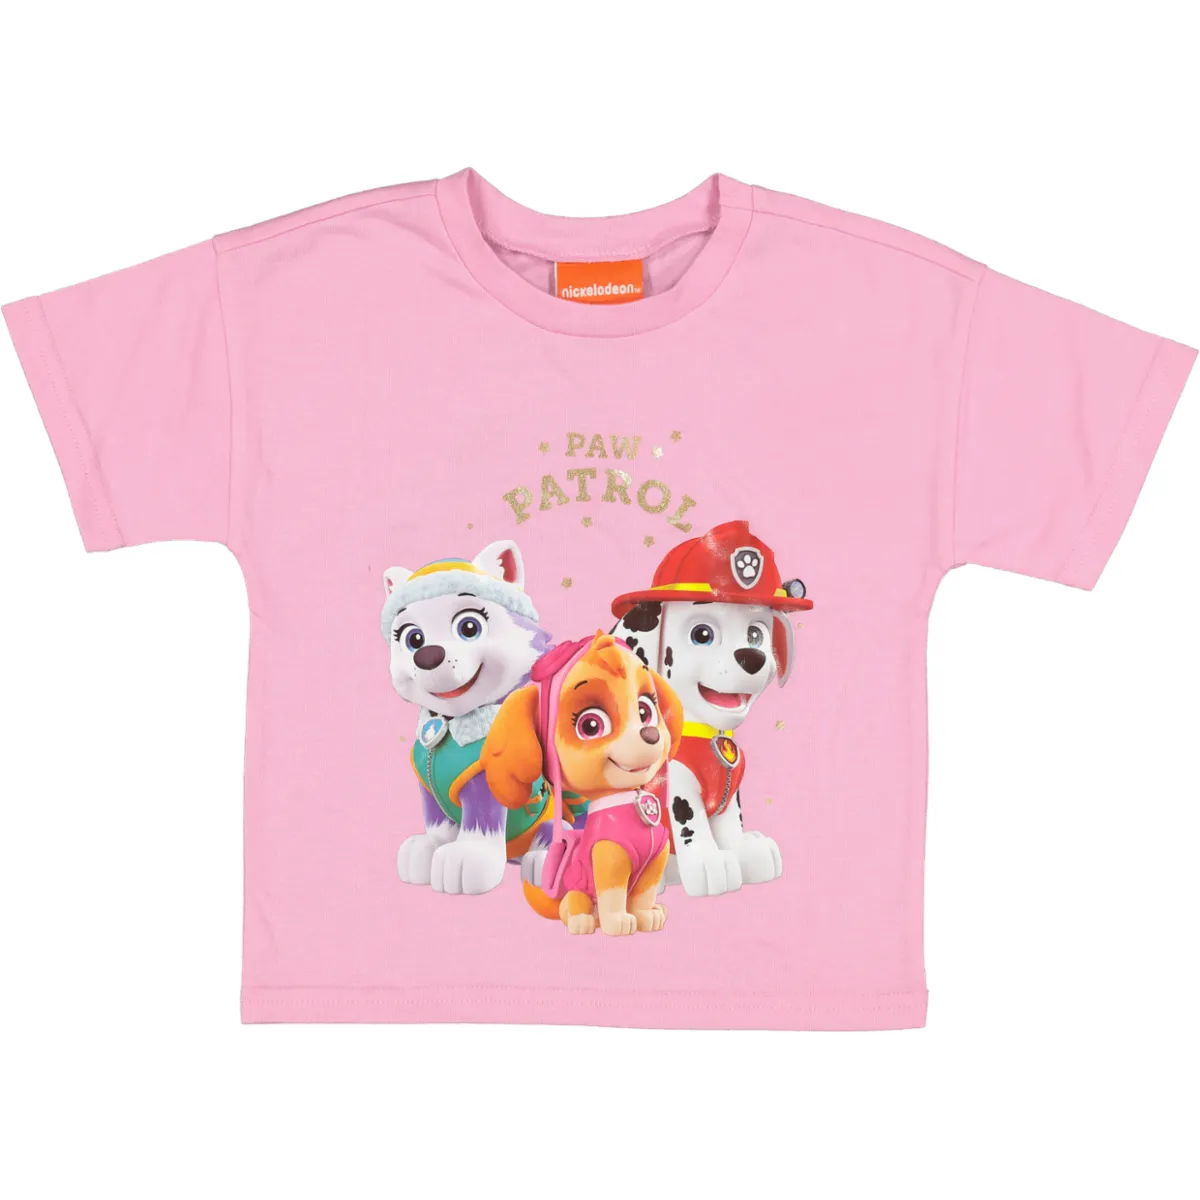 Paw Patrol Girls' 100% Combed Cotton 10-Pack South Africa